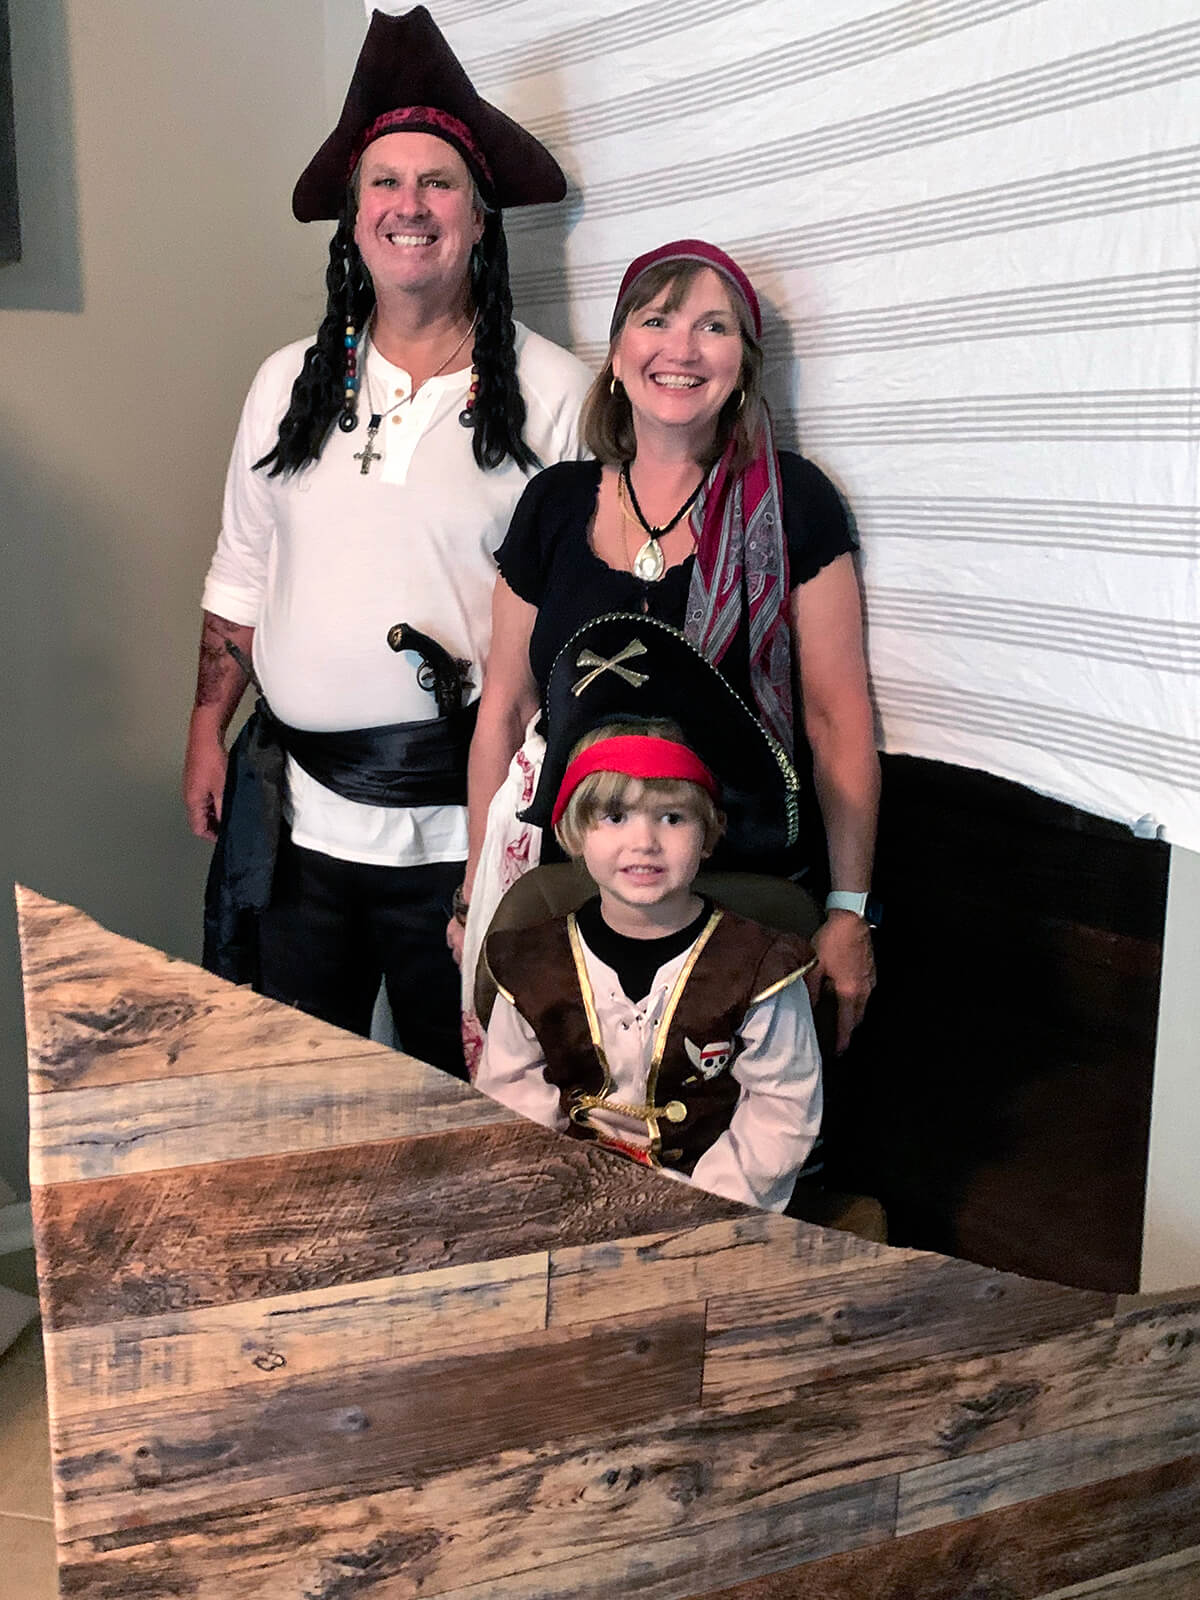 pirate party cardboard ship photo booth